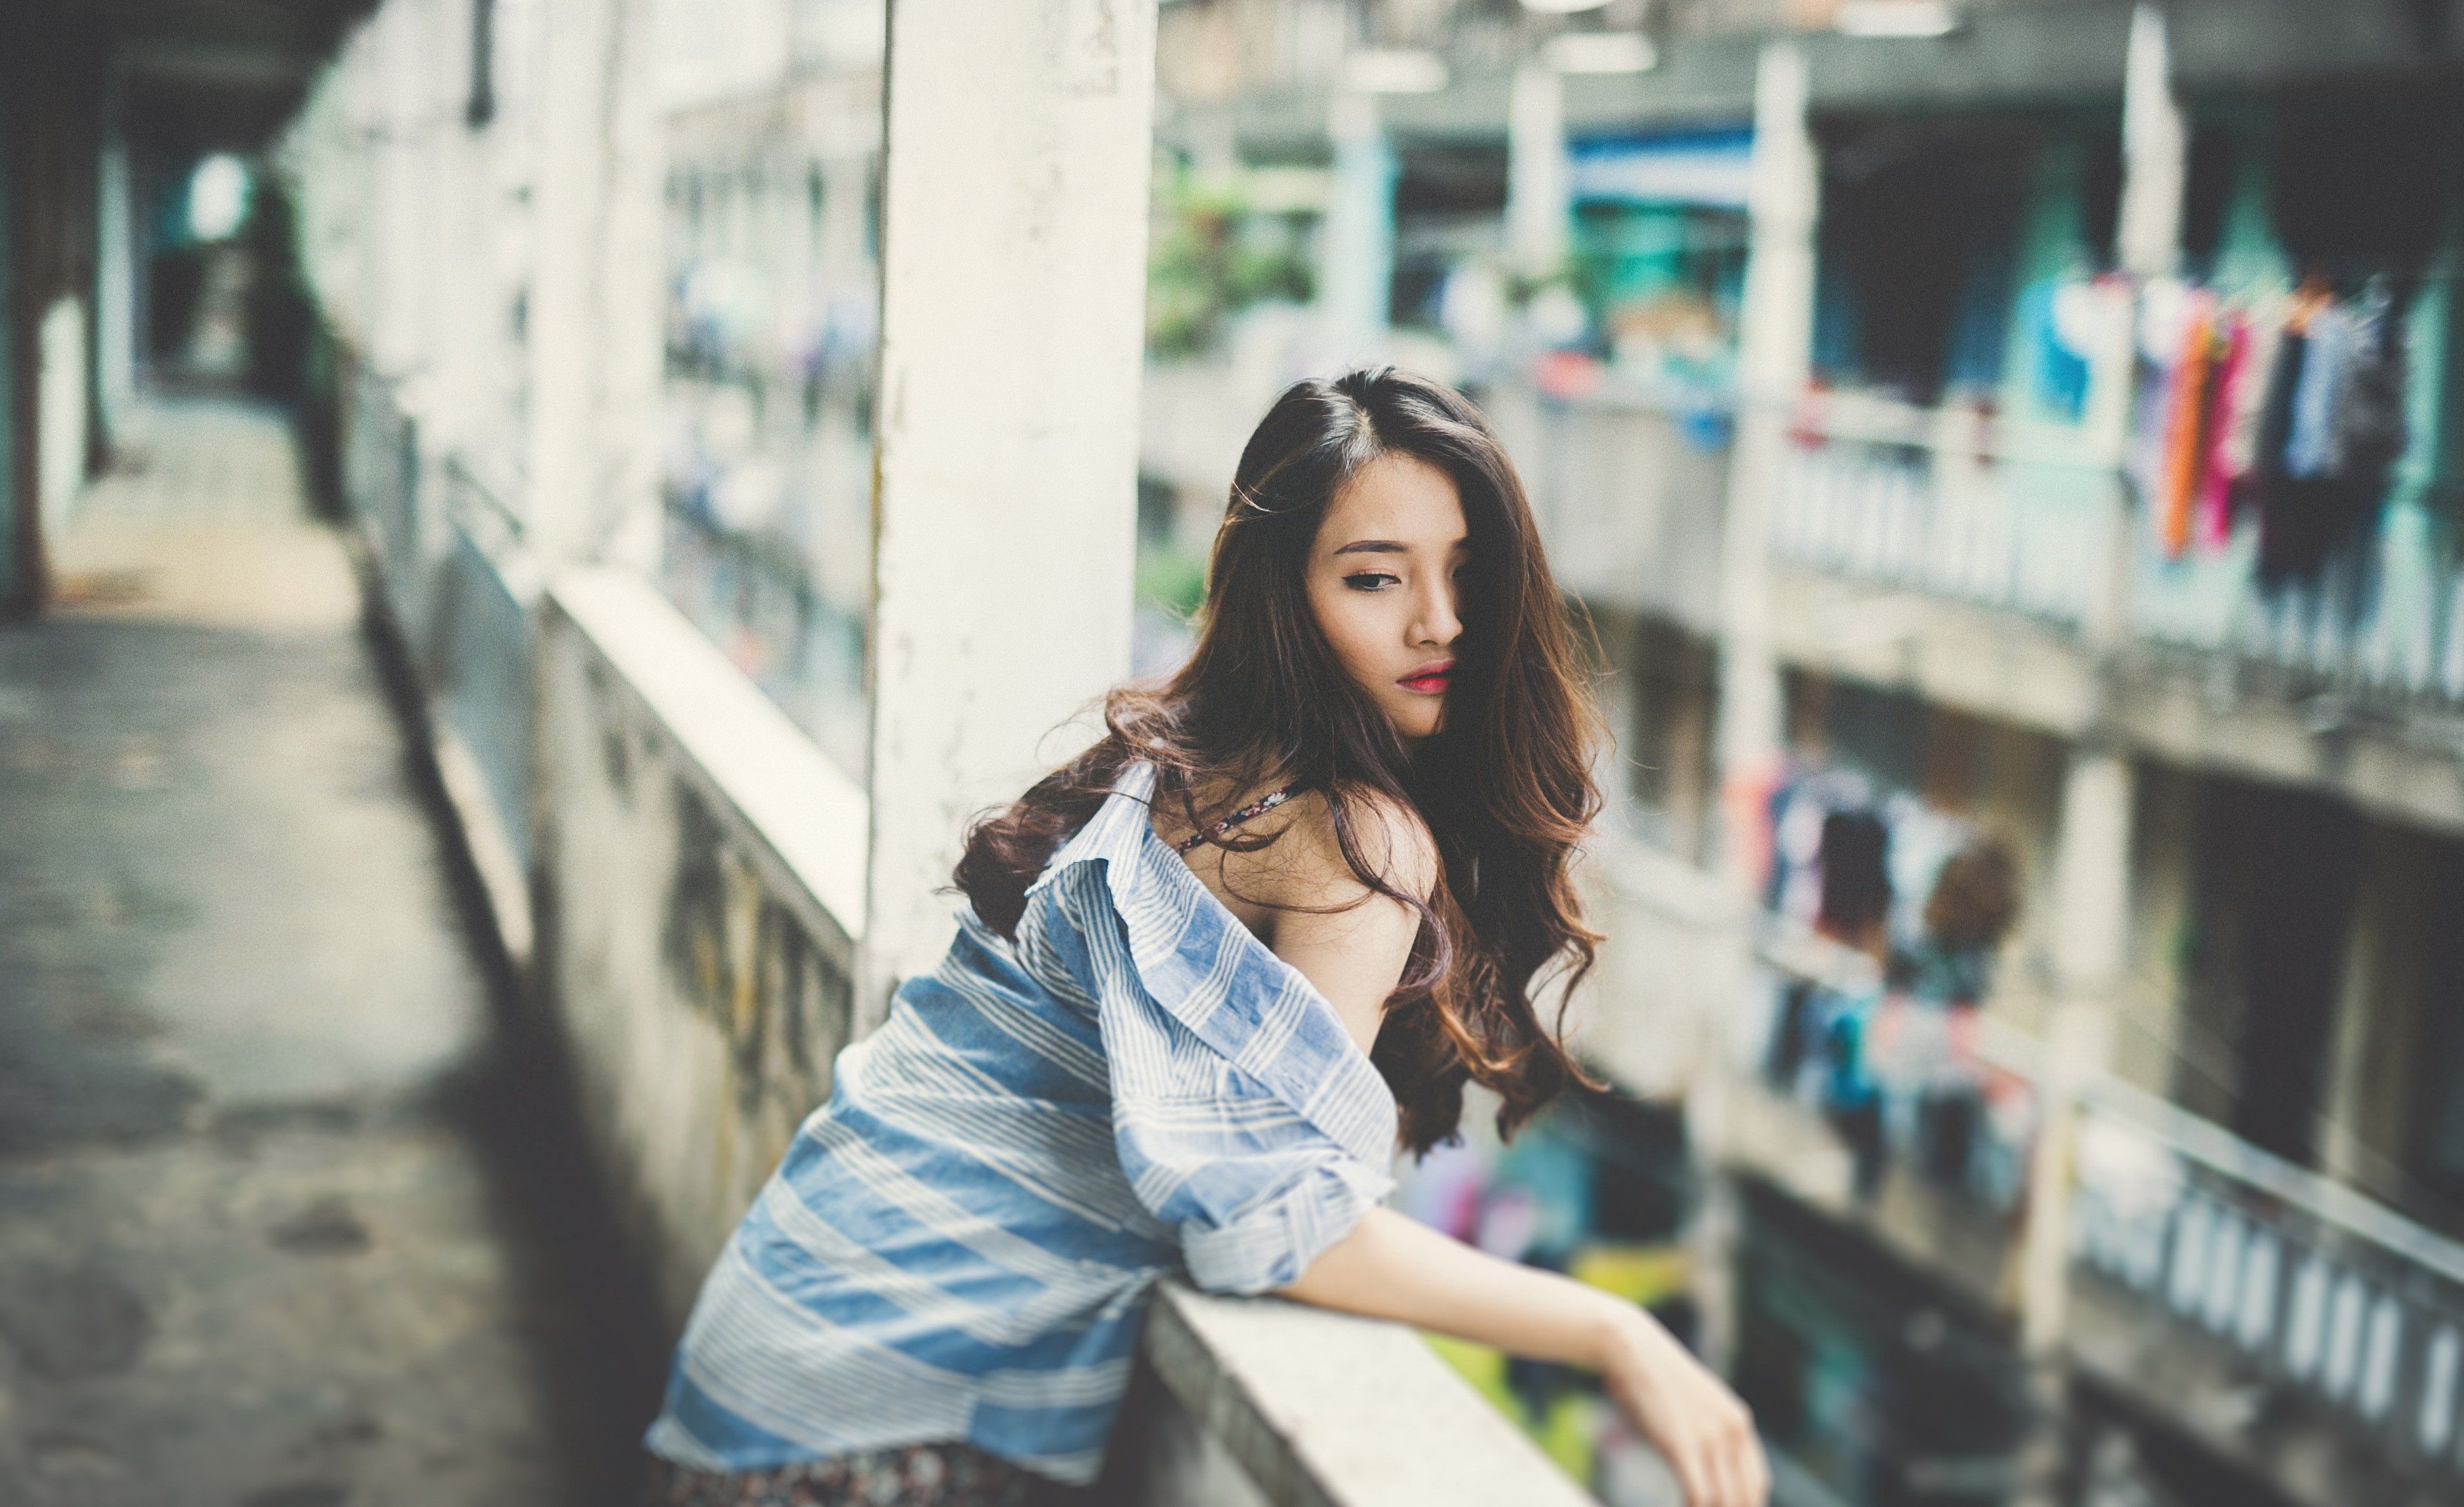 Wallpaper, women, model, street, Asian, road, dress, blue, fashion, spring, Person, clothing, color, girl, beauty, lady, photograph, snapshot, portrait photography, photo shoot 3885x2376